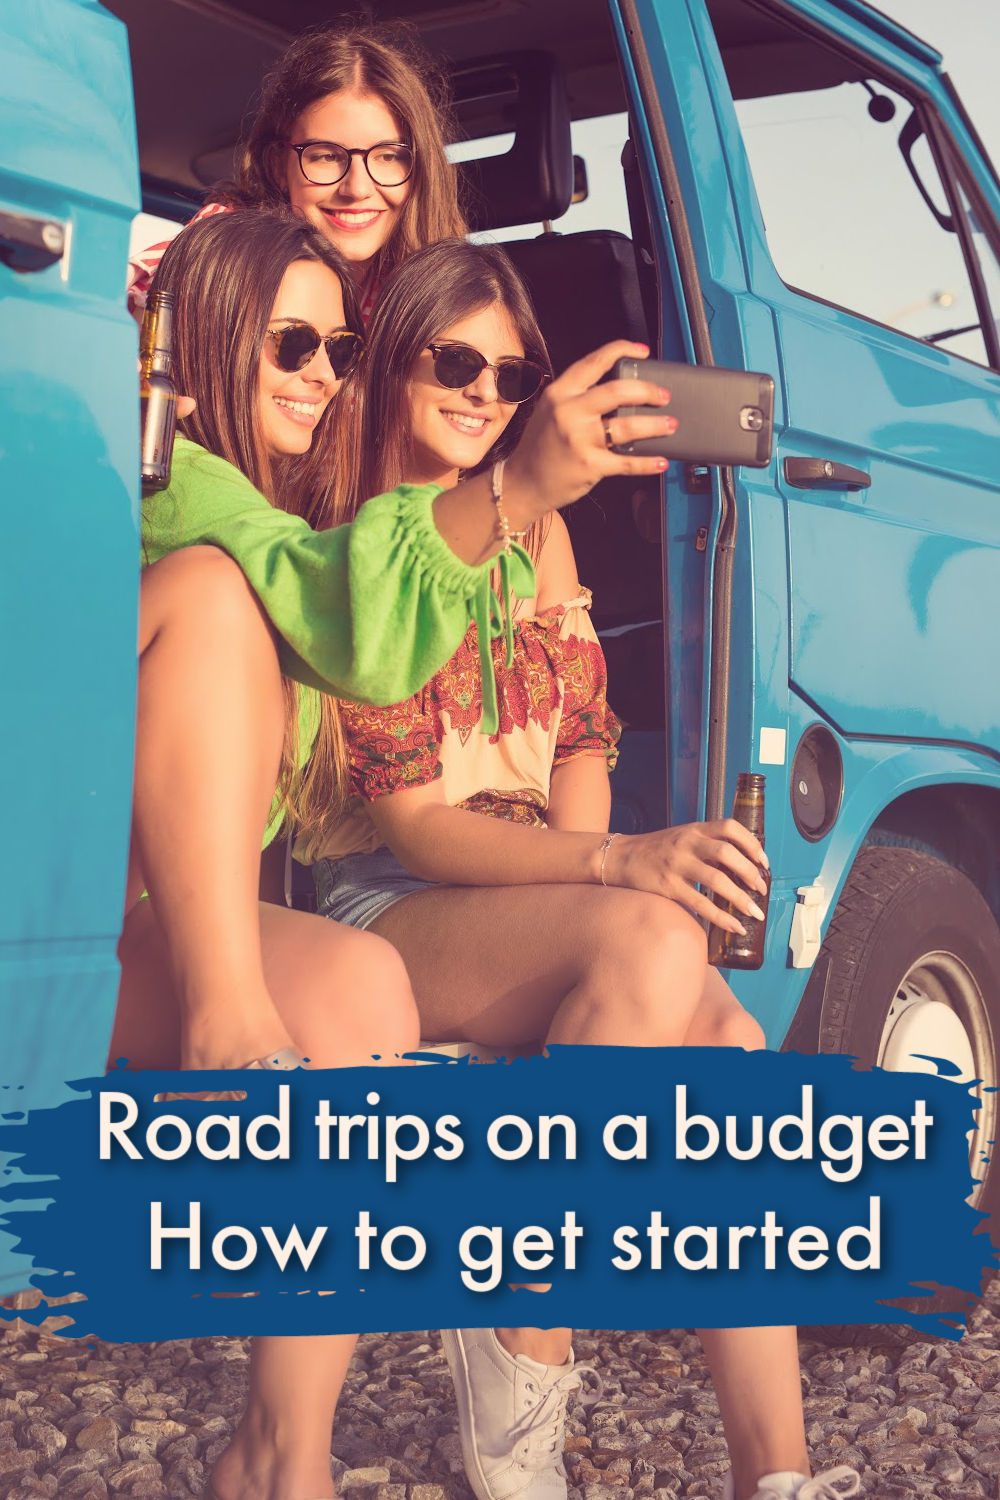 Practical tips to organize and go on multiple road trips on a budget throughout the year. From getting the right gear to saving tips on cooking and accommodation. Here is a guide to getting started on road trips. 